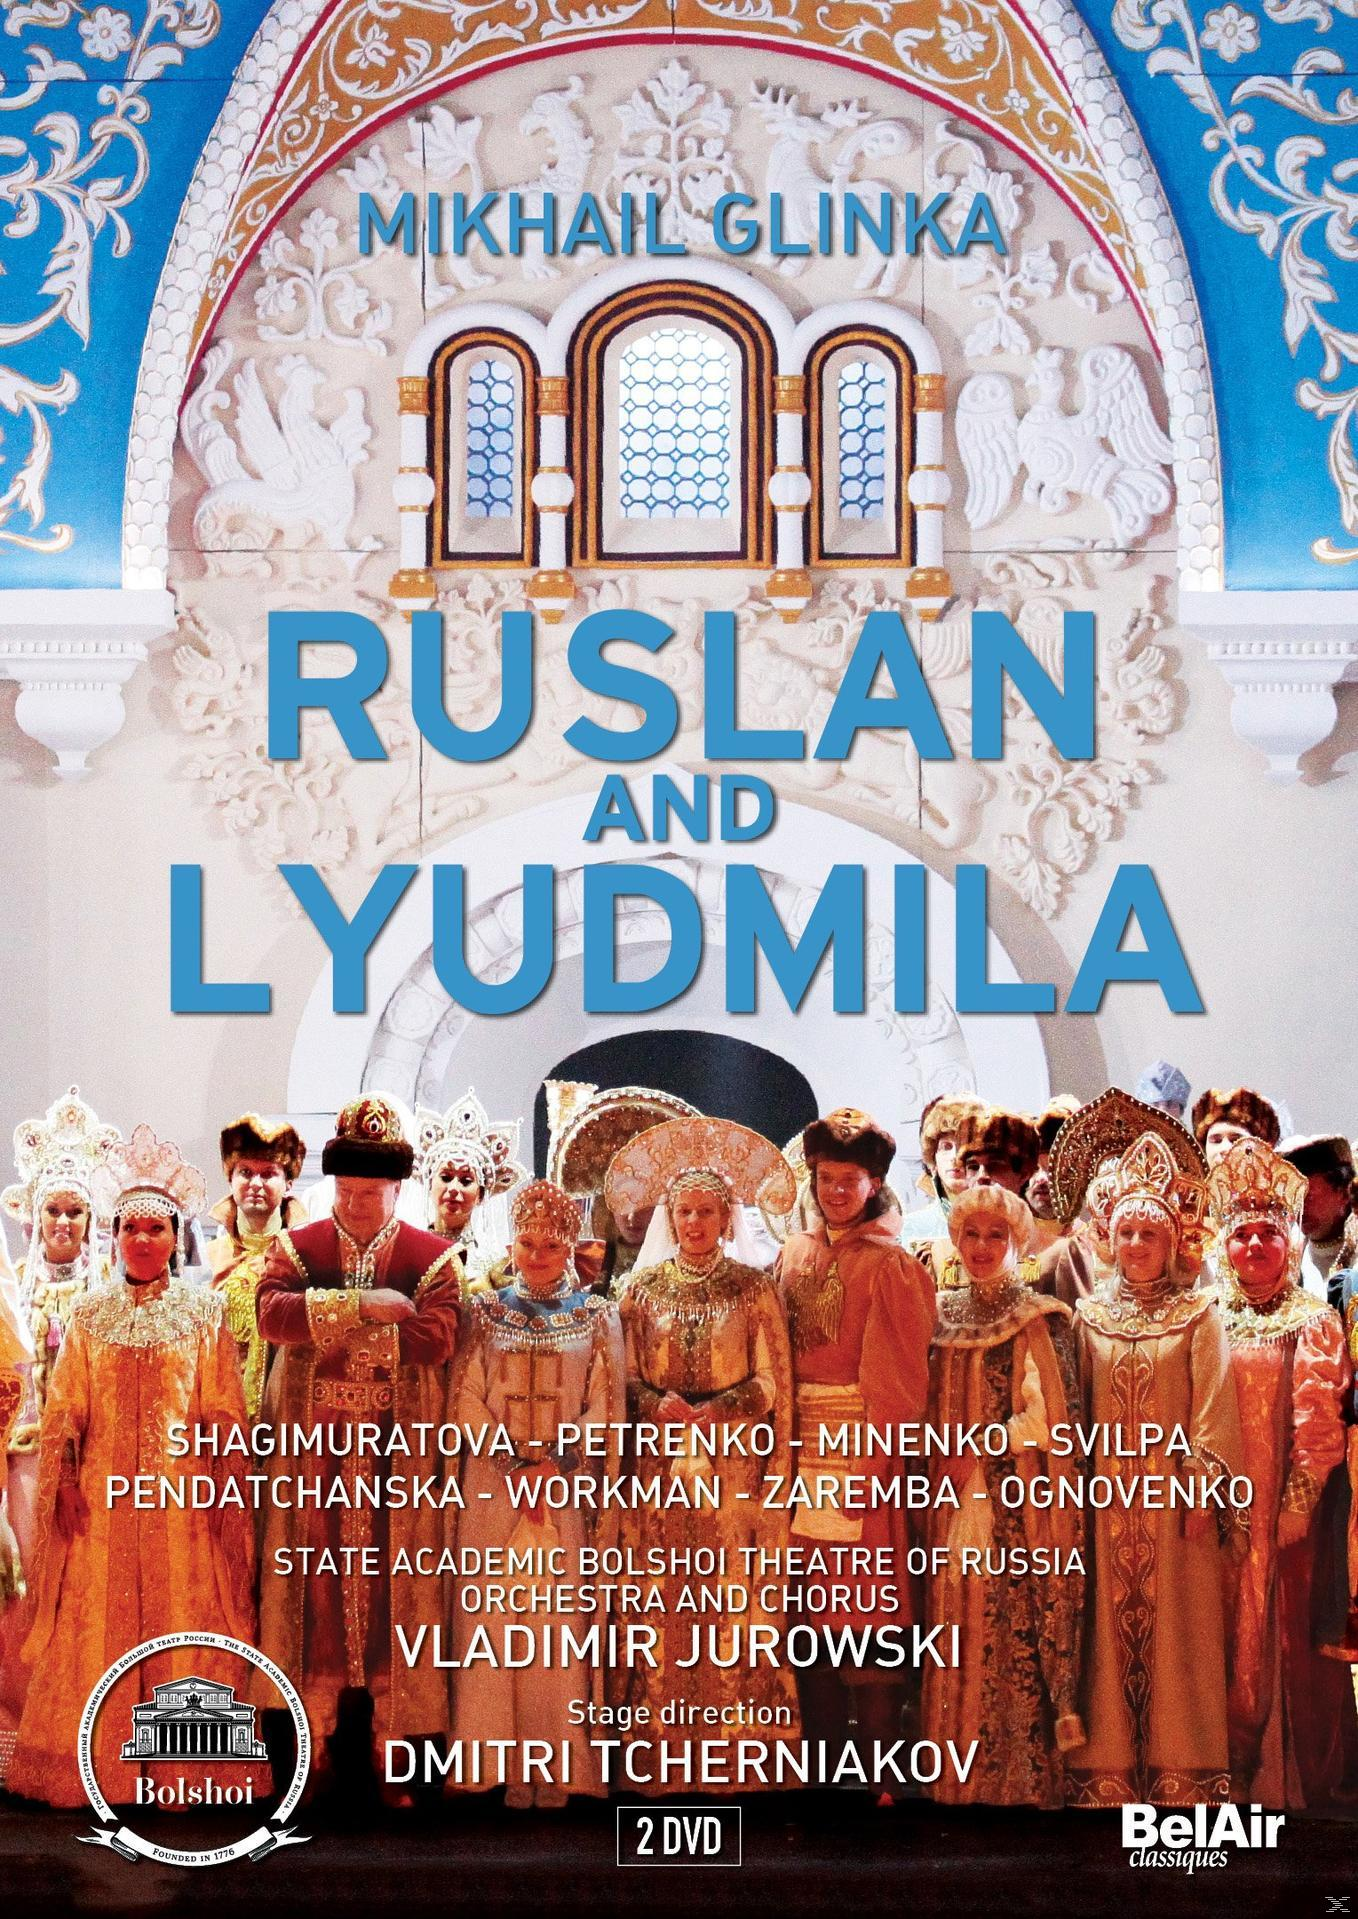 VARIOUS, Orchestra And Chorus - Of Russia Academic (DVD) Ludmila Of Und The - Ruslan Bolchoi State Theater